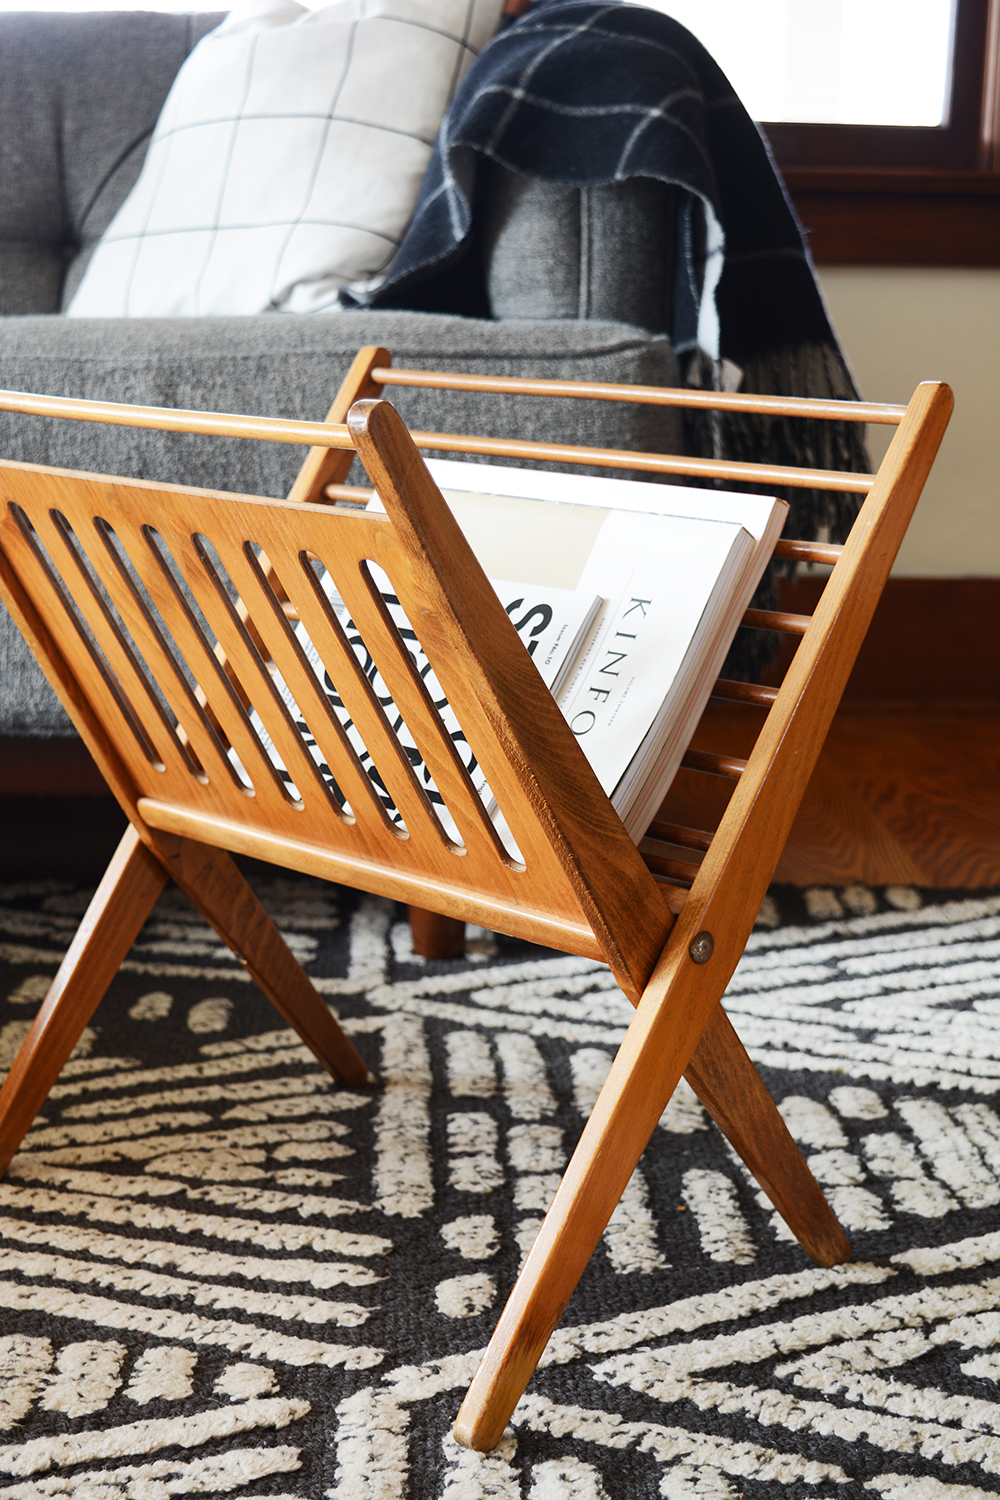 Midcentury magazine rack - thrifted for $2